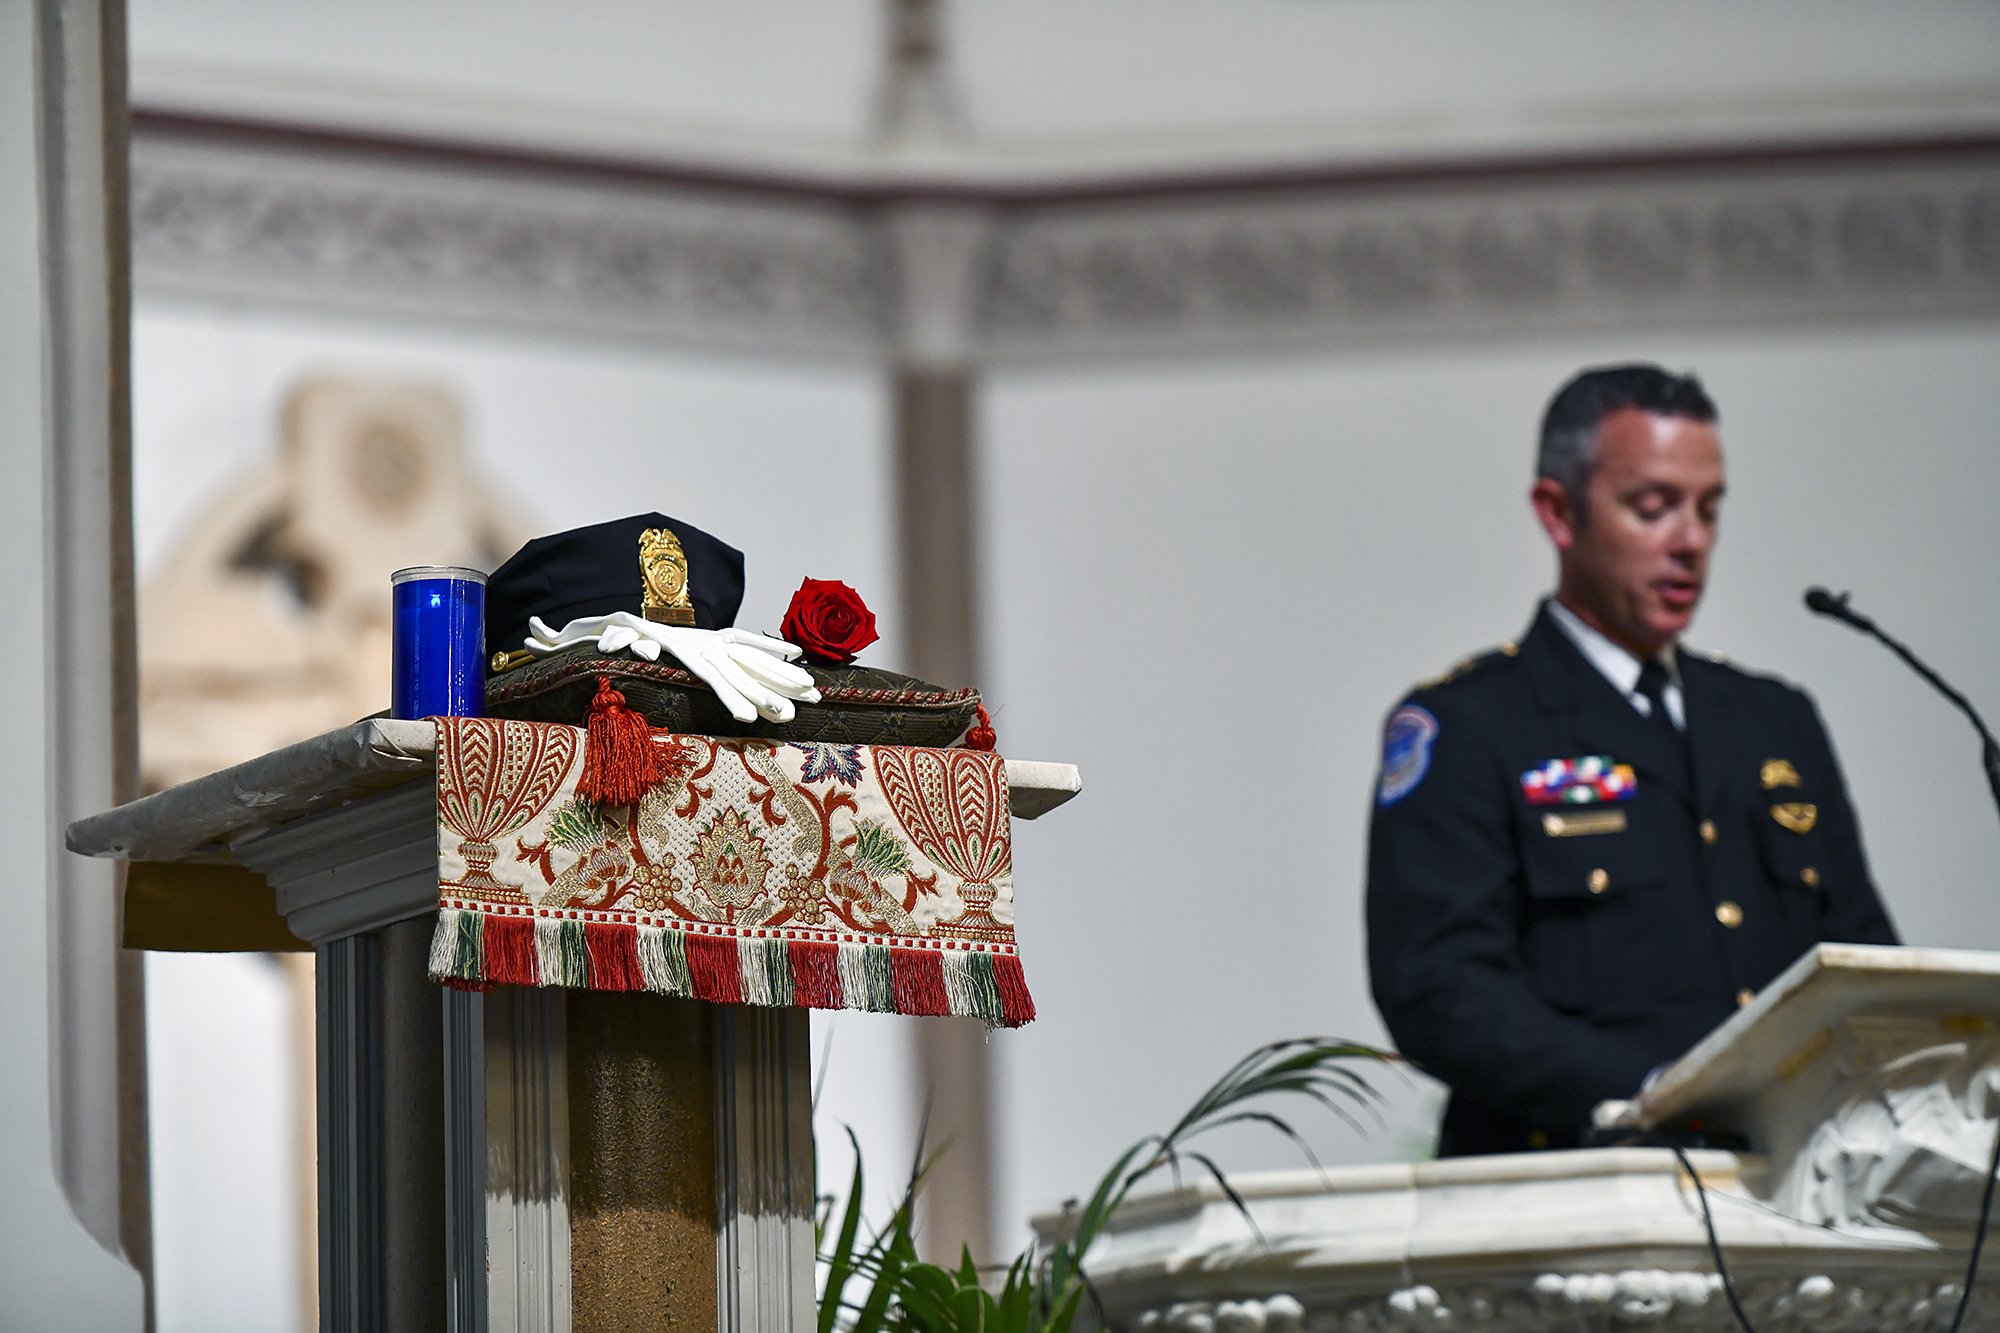 National Police Week 2022: Memorial Hat at Blue Mass